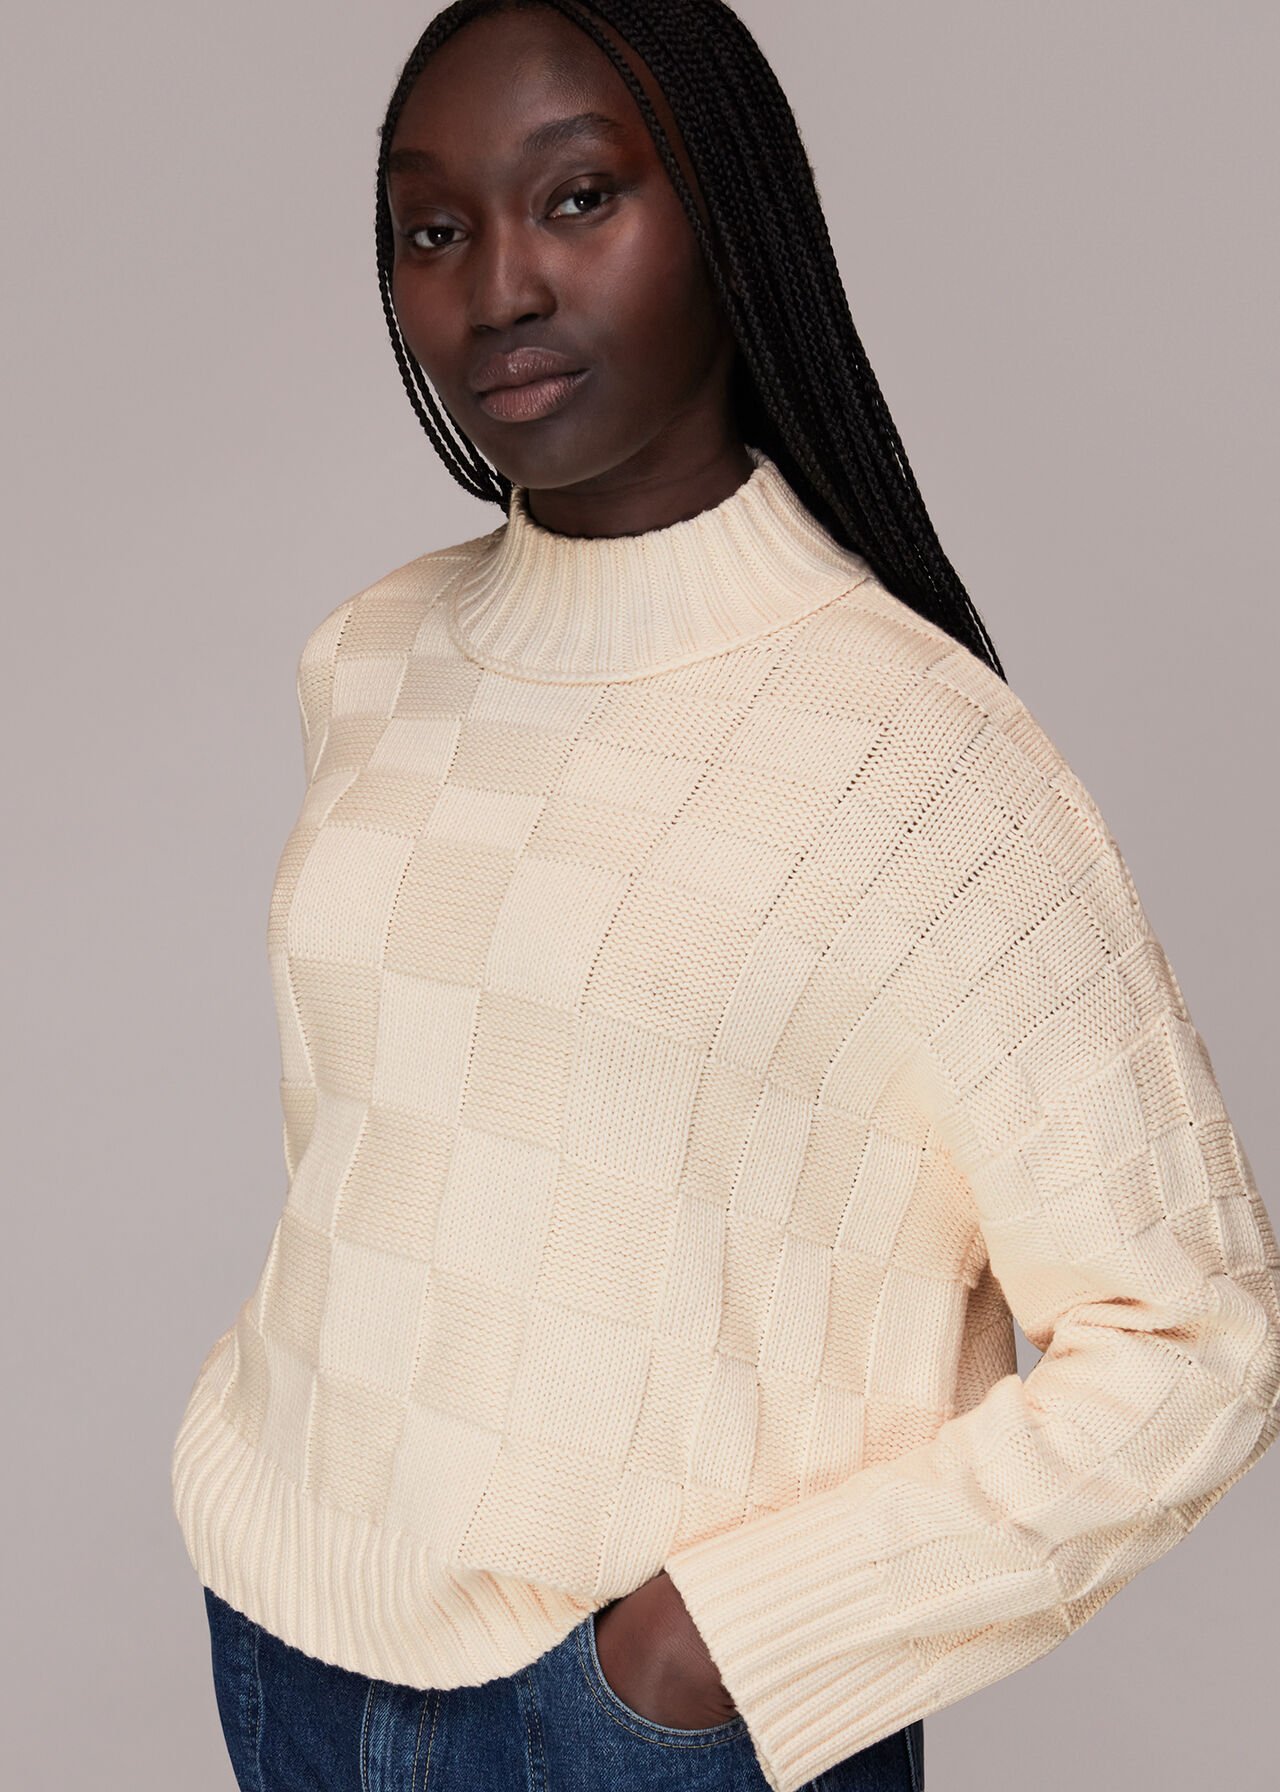 Ivory/Multi Texture Check Sweater | WHISTLES